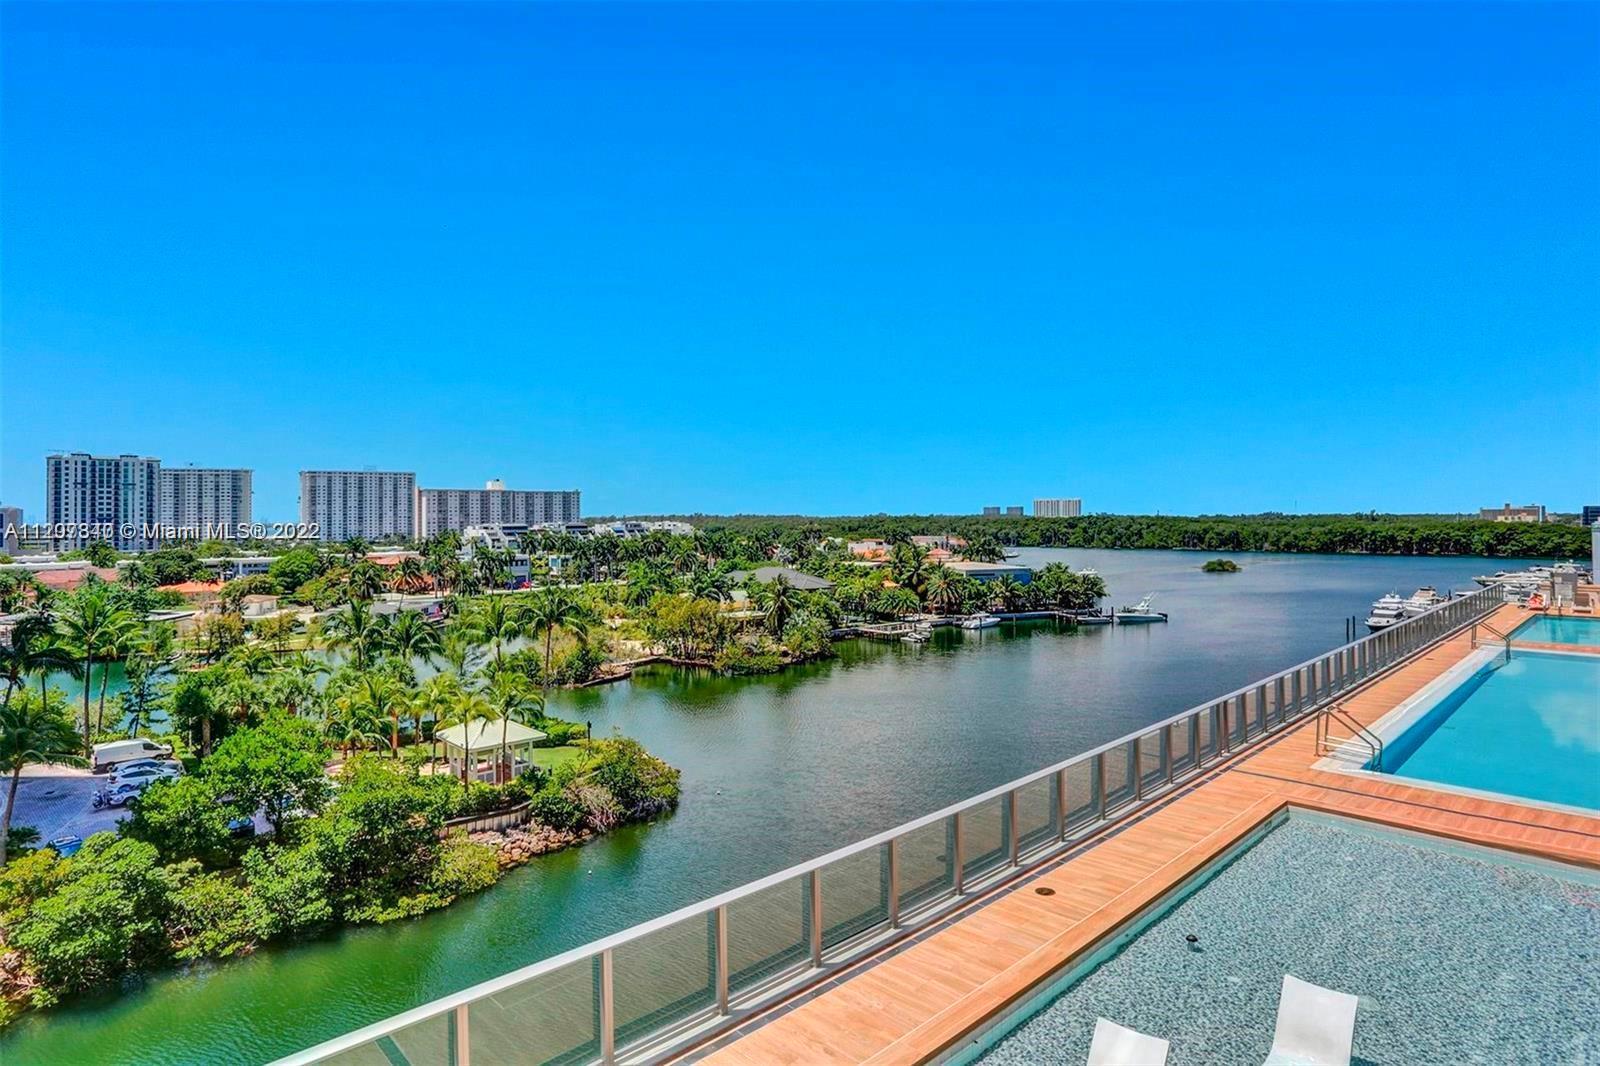 Magnificent corner unit overlooking Intercoastal water views. This fully upgraded residence features